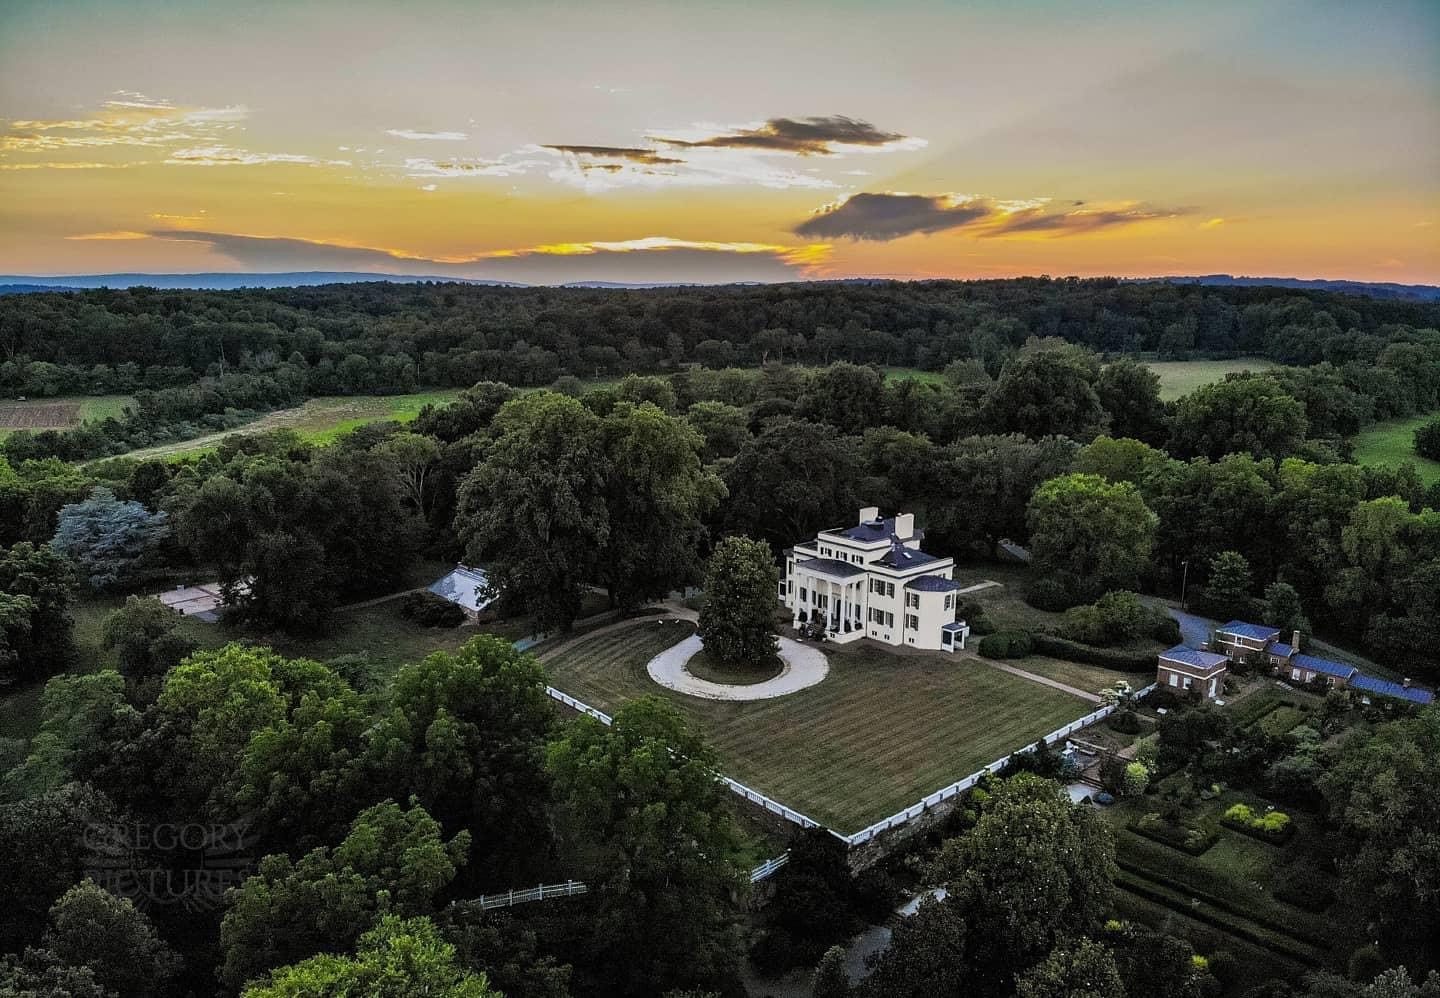 Oatlands drone picture showing the mansion and grounds at sunset.